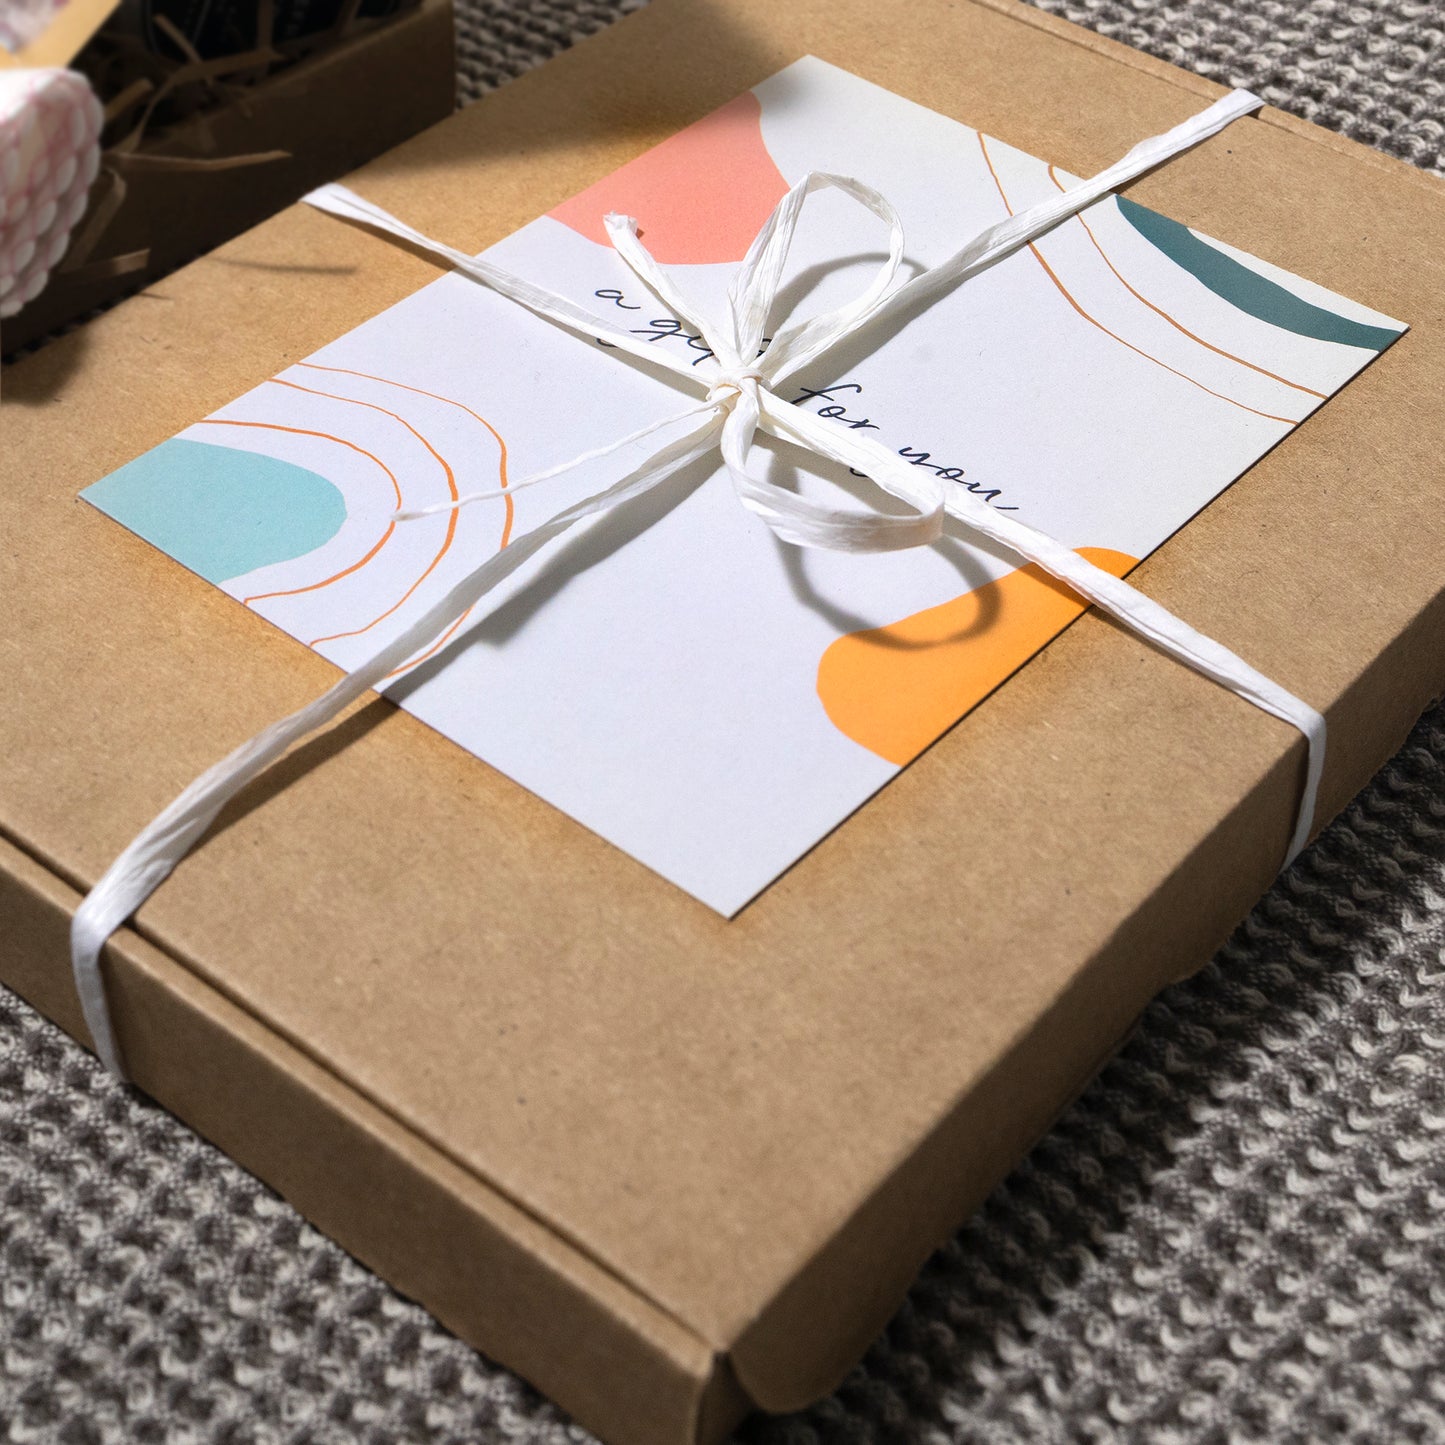 A brown cardboard gift box tied with a white ribbon and a decorative card on top featuring abstract designs in pastel colors, placed on a textured gray fabric surface.